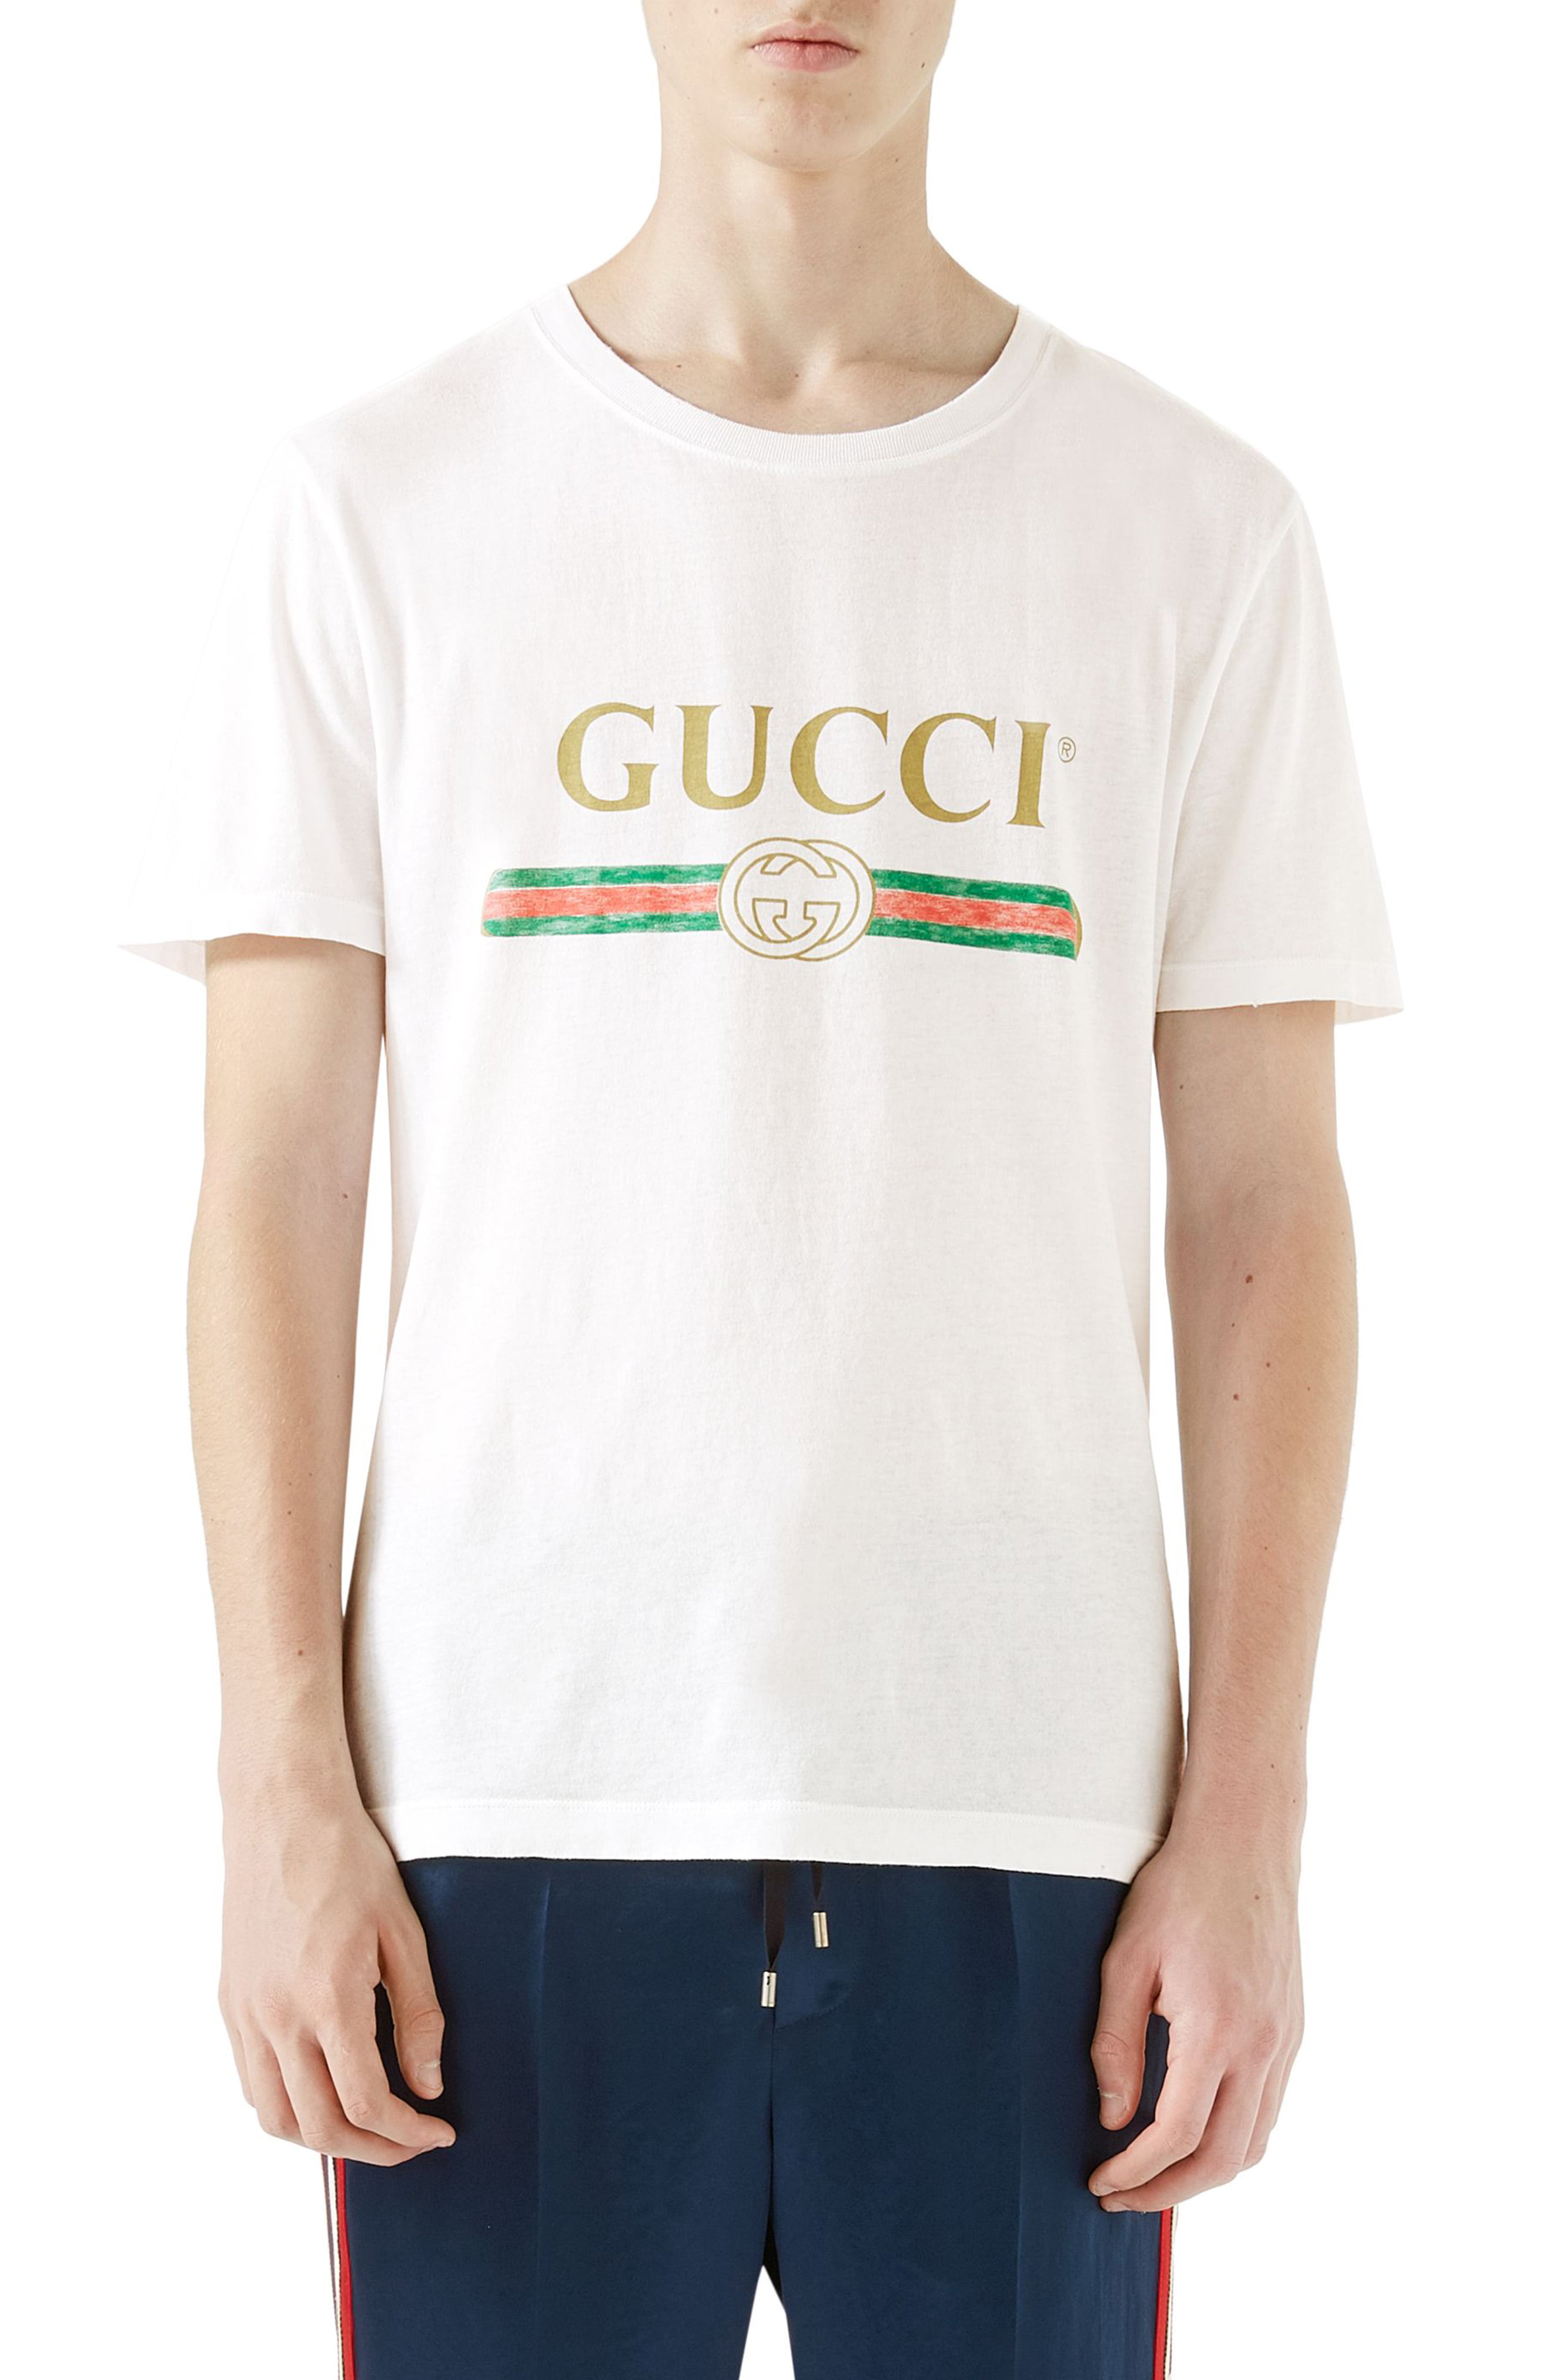 how much is a gucci shirt